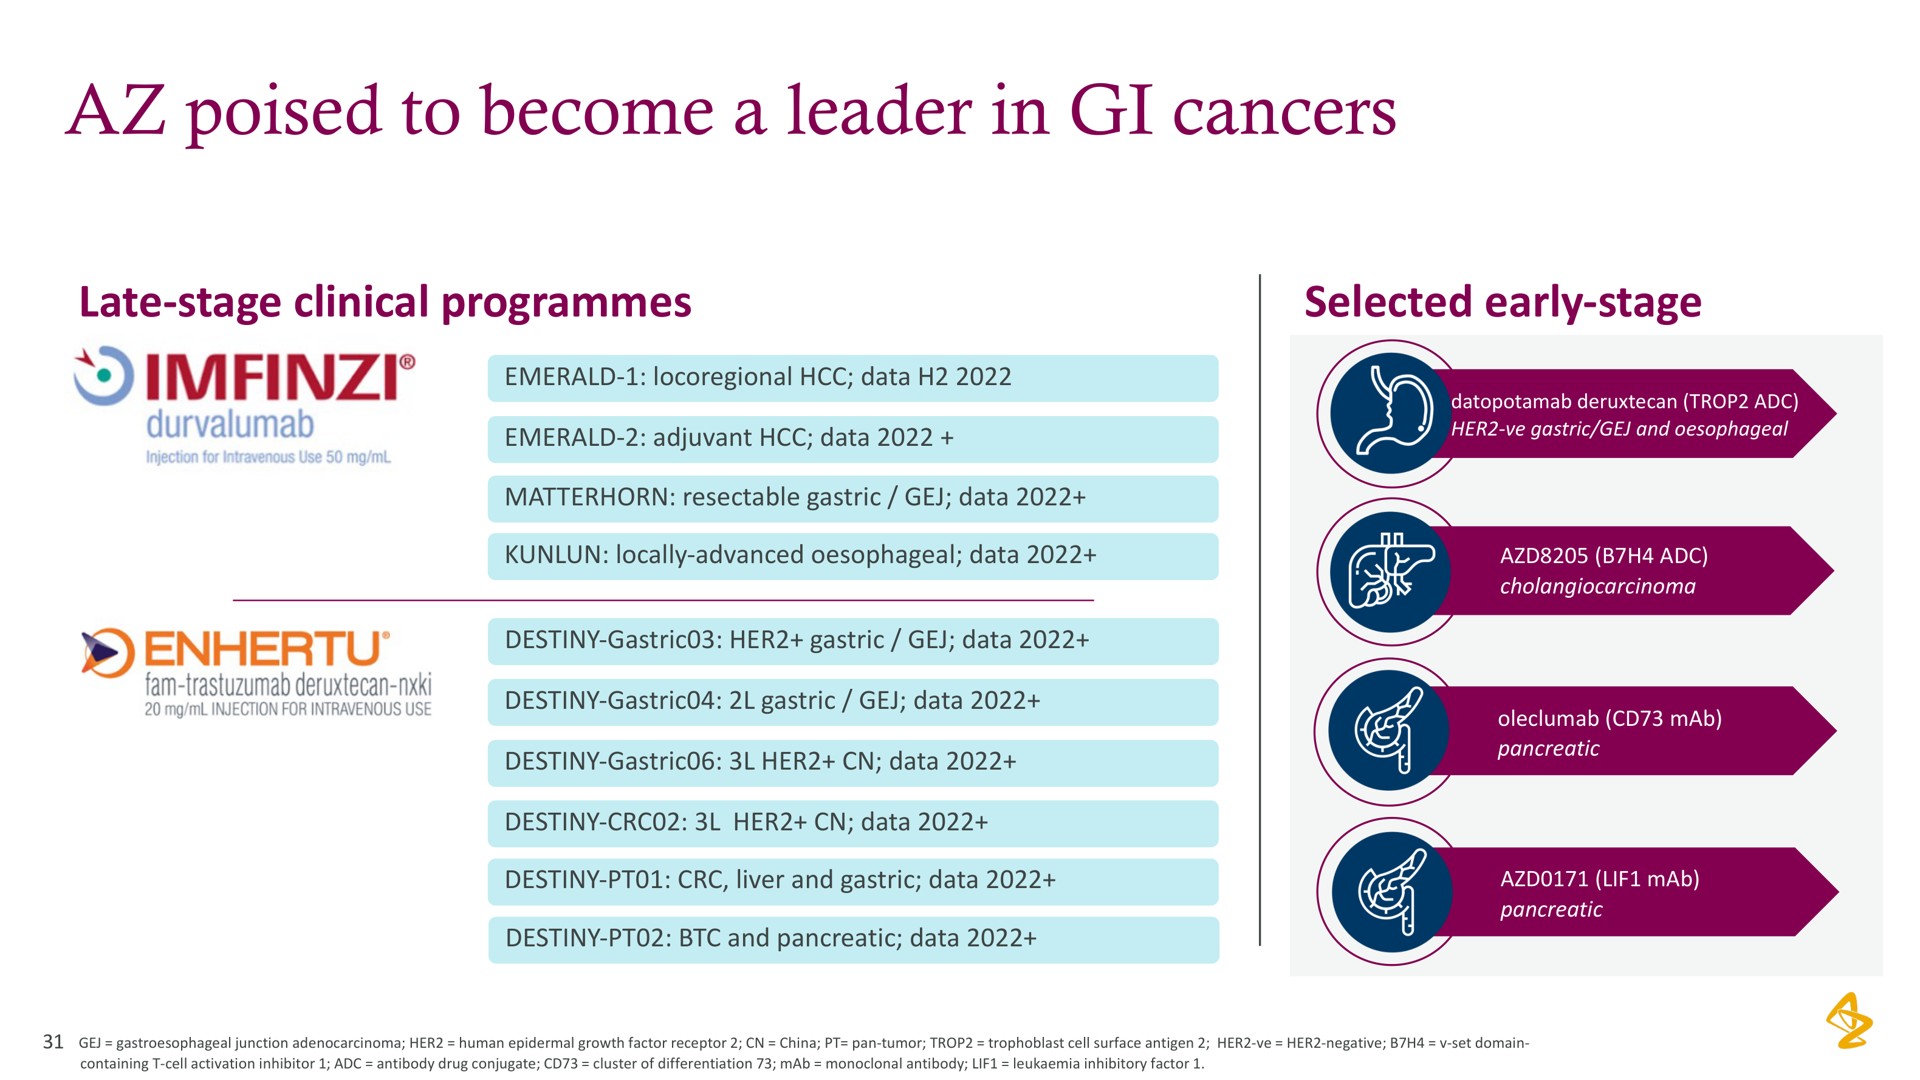 poised to become a leader in cancers | AstraZeneca